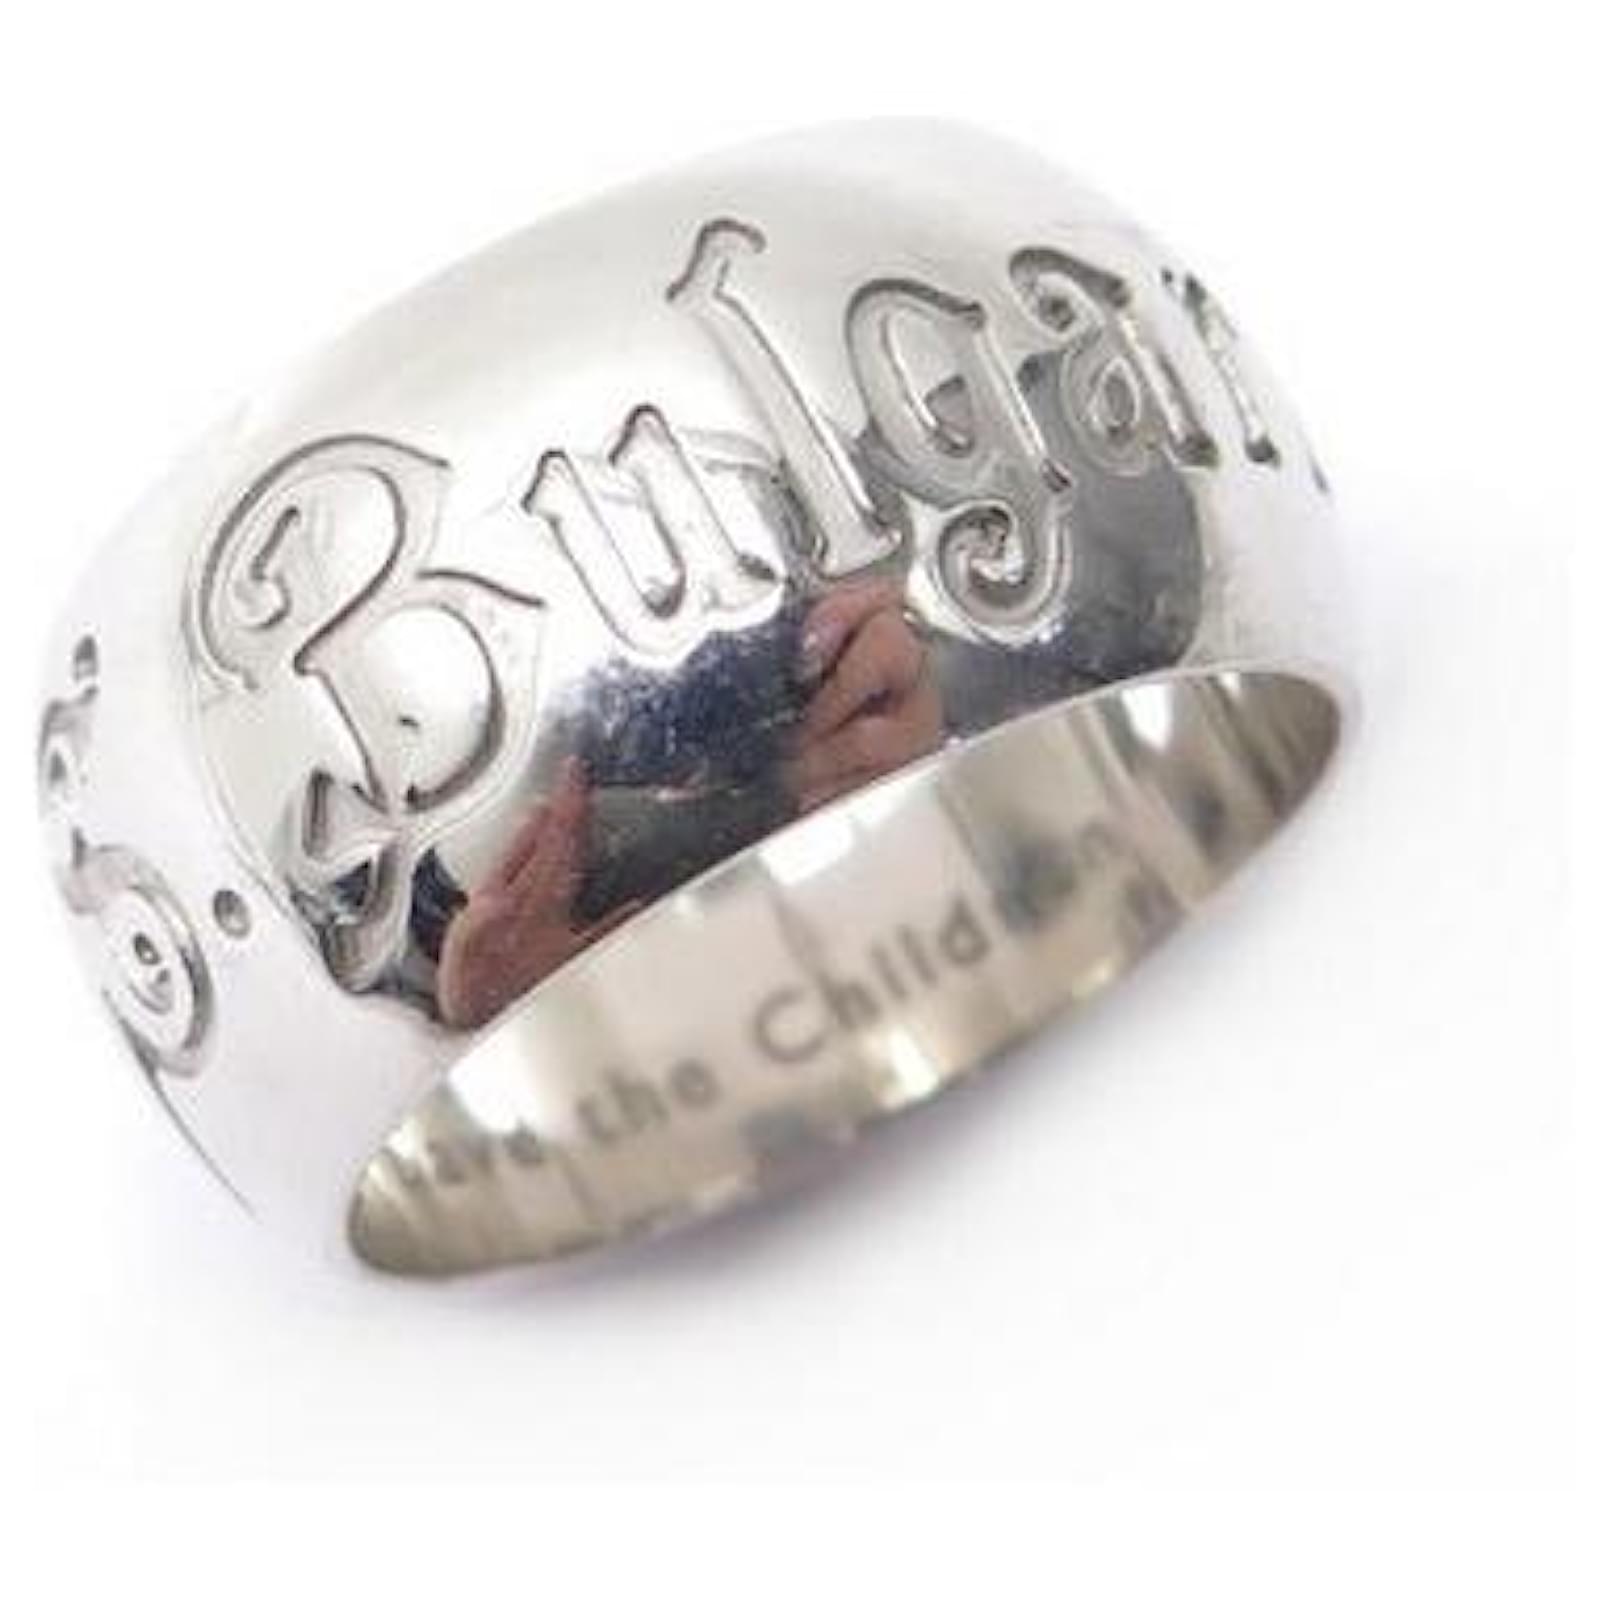 BULGARI SAVE THE CHILDREN T RING54 in Sterling Silver 925 SILVER RING  Silvery  - Joli Closet